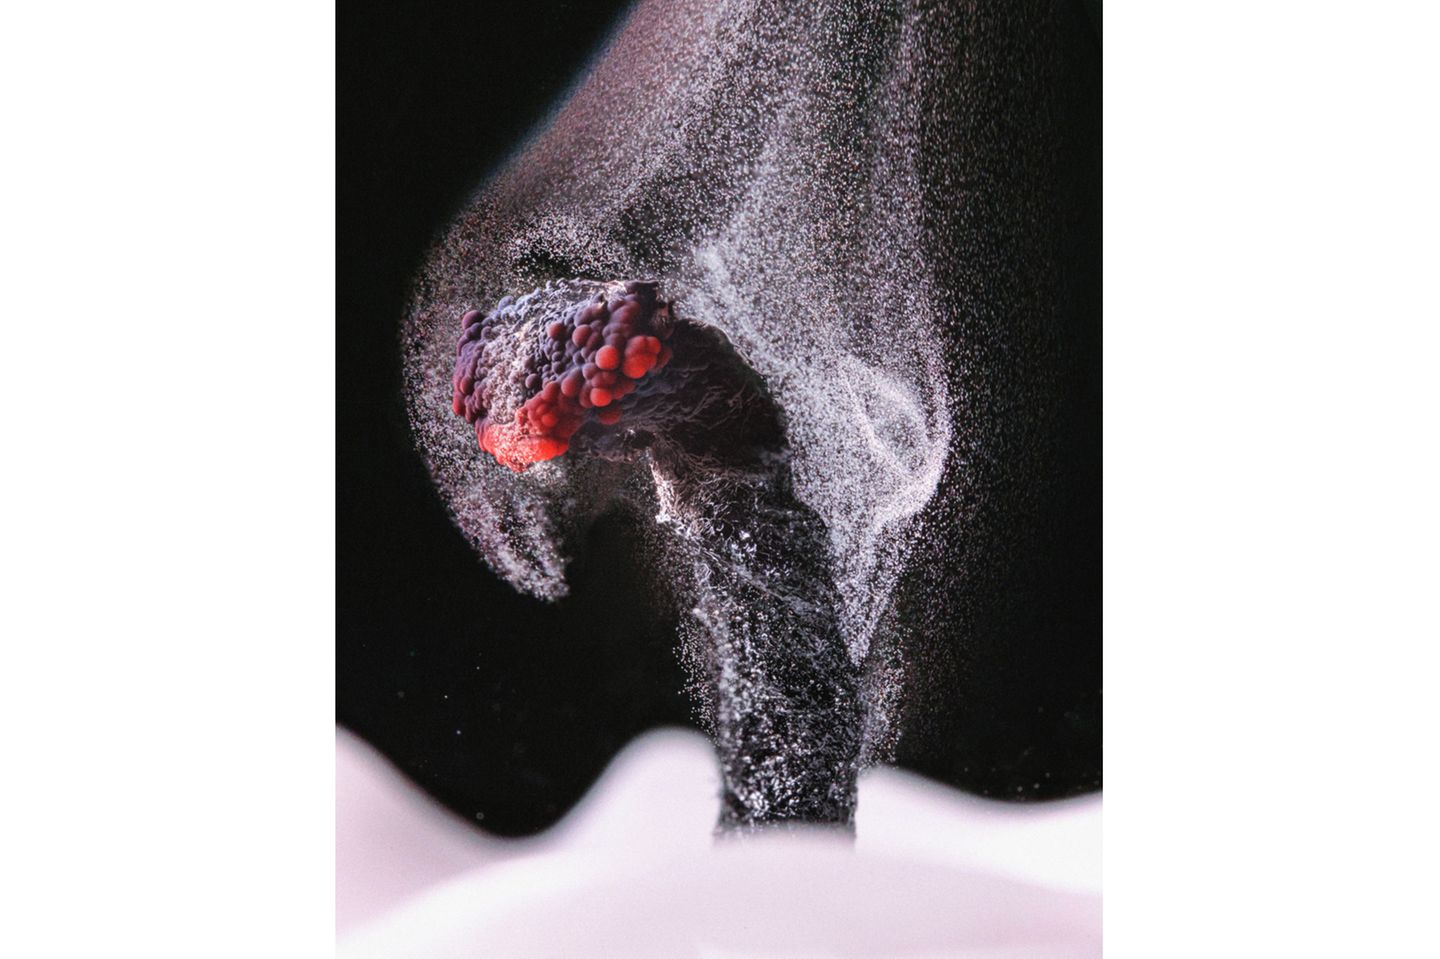 6th Place    Ole Bielfeldt    Macrofying    Cologne, North Rhine-Westphalia, Germany    Unburned particles of carbon released when the hydrocarbon chain of candle wax breaks down    Brightfield, Image Stacking    2.5X (Objective Lens Magnification)     